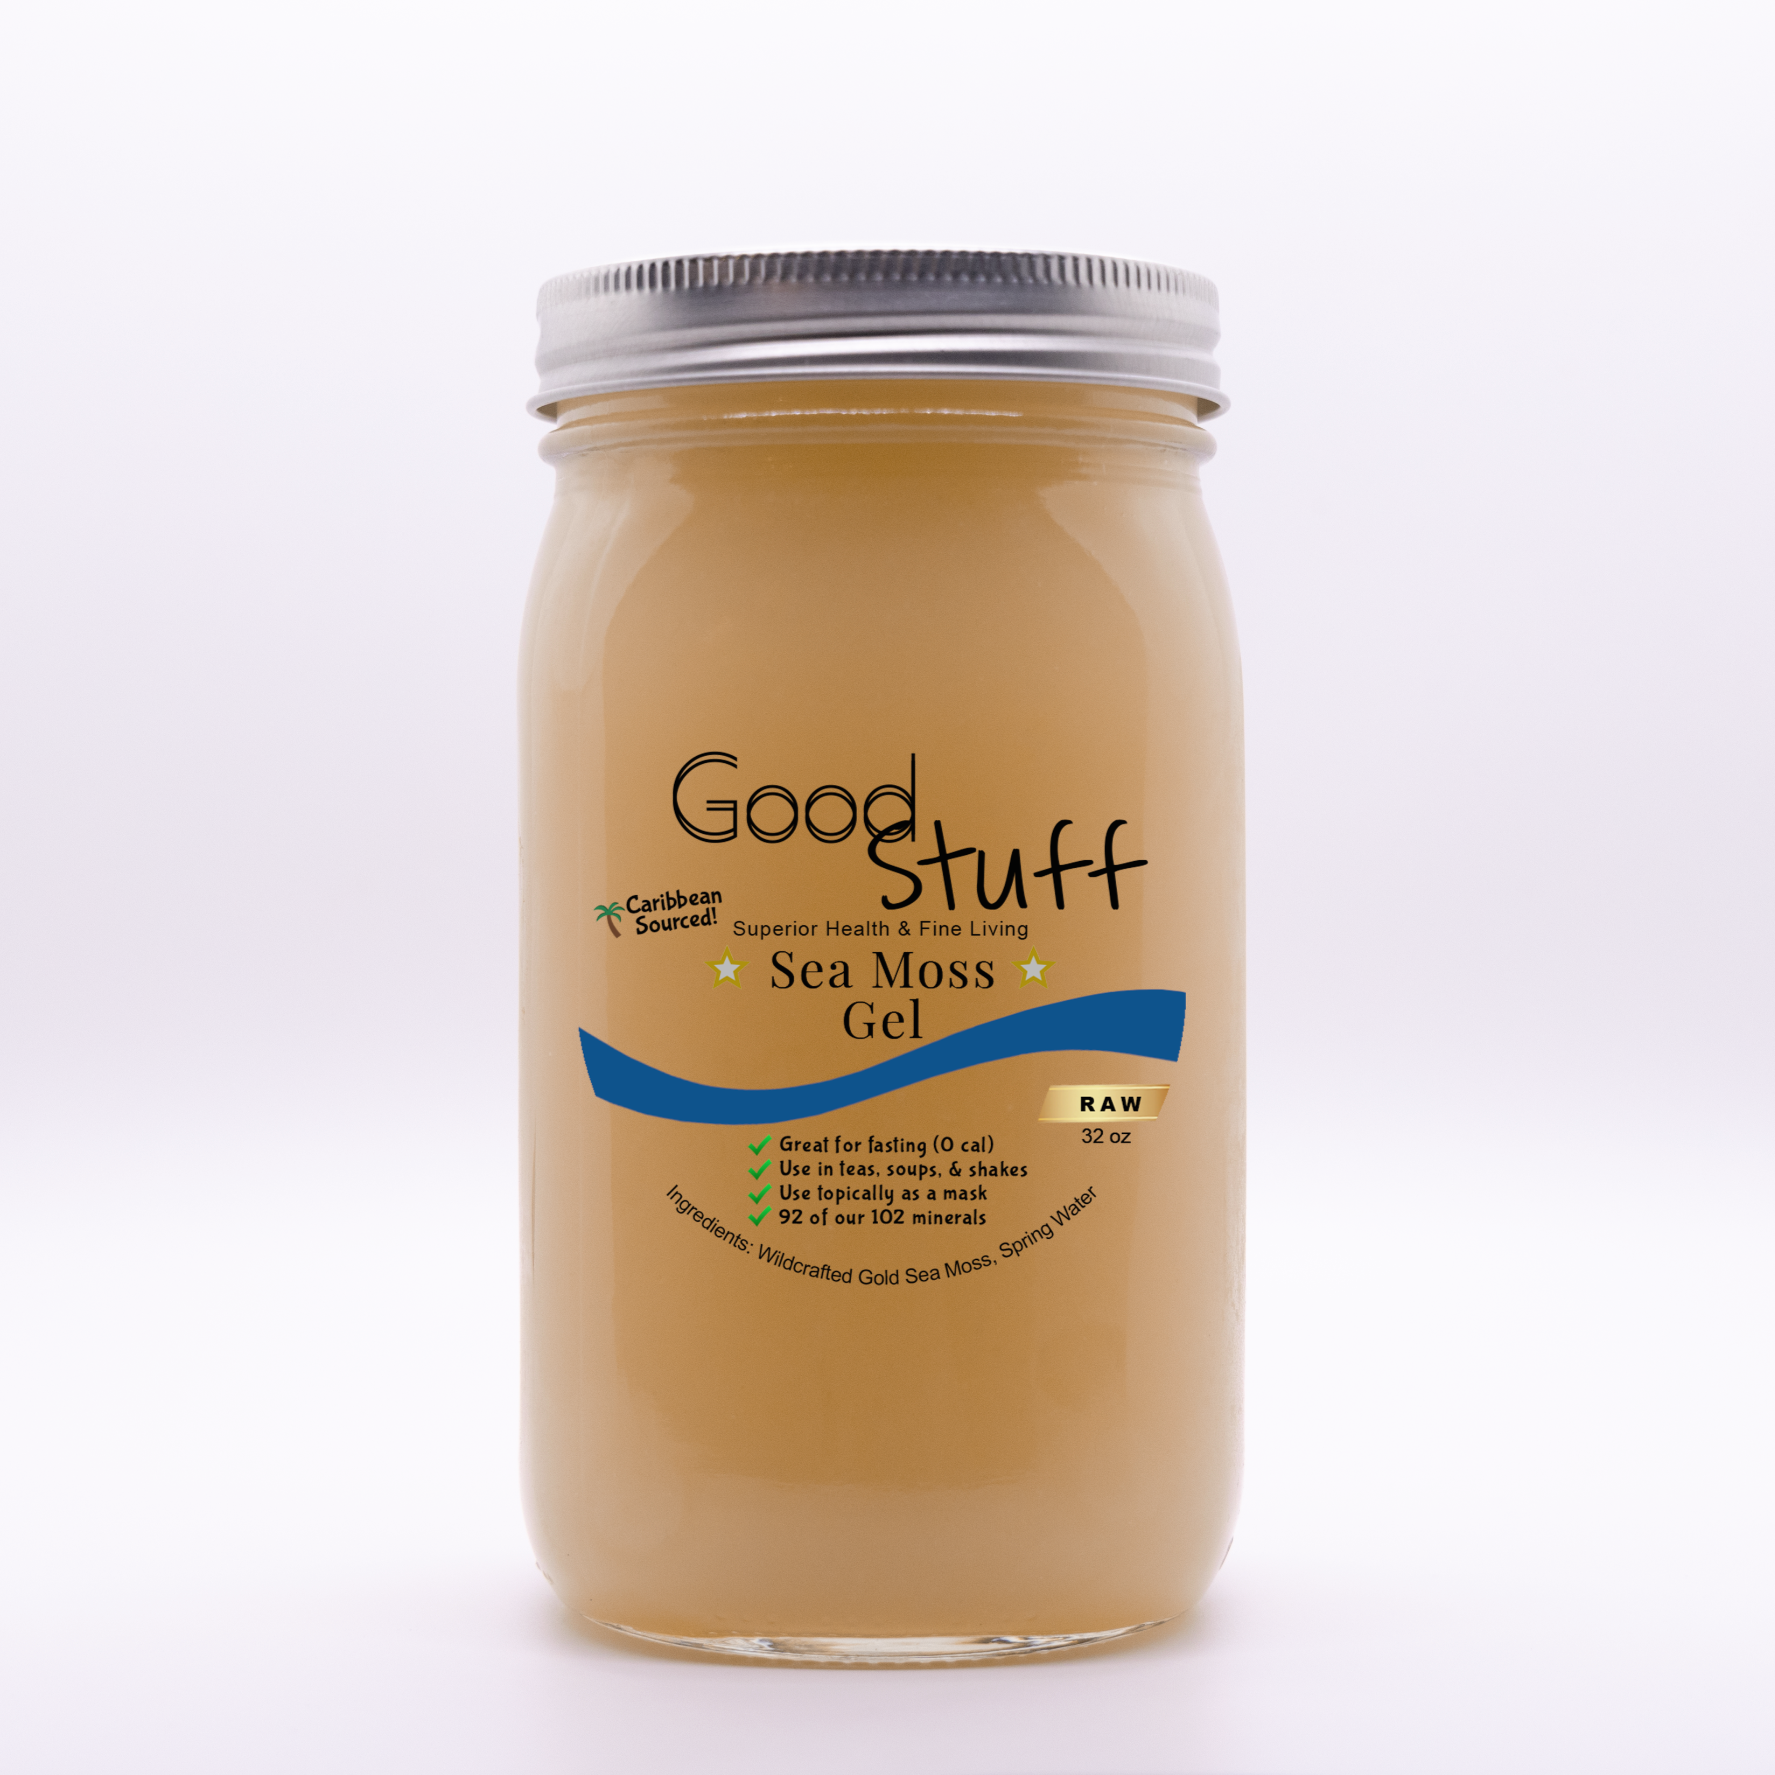 32oz glass jar filled with Wildcrafted Sea Moss Gel from Good Stuff Health